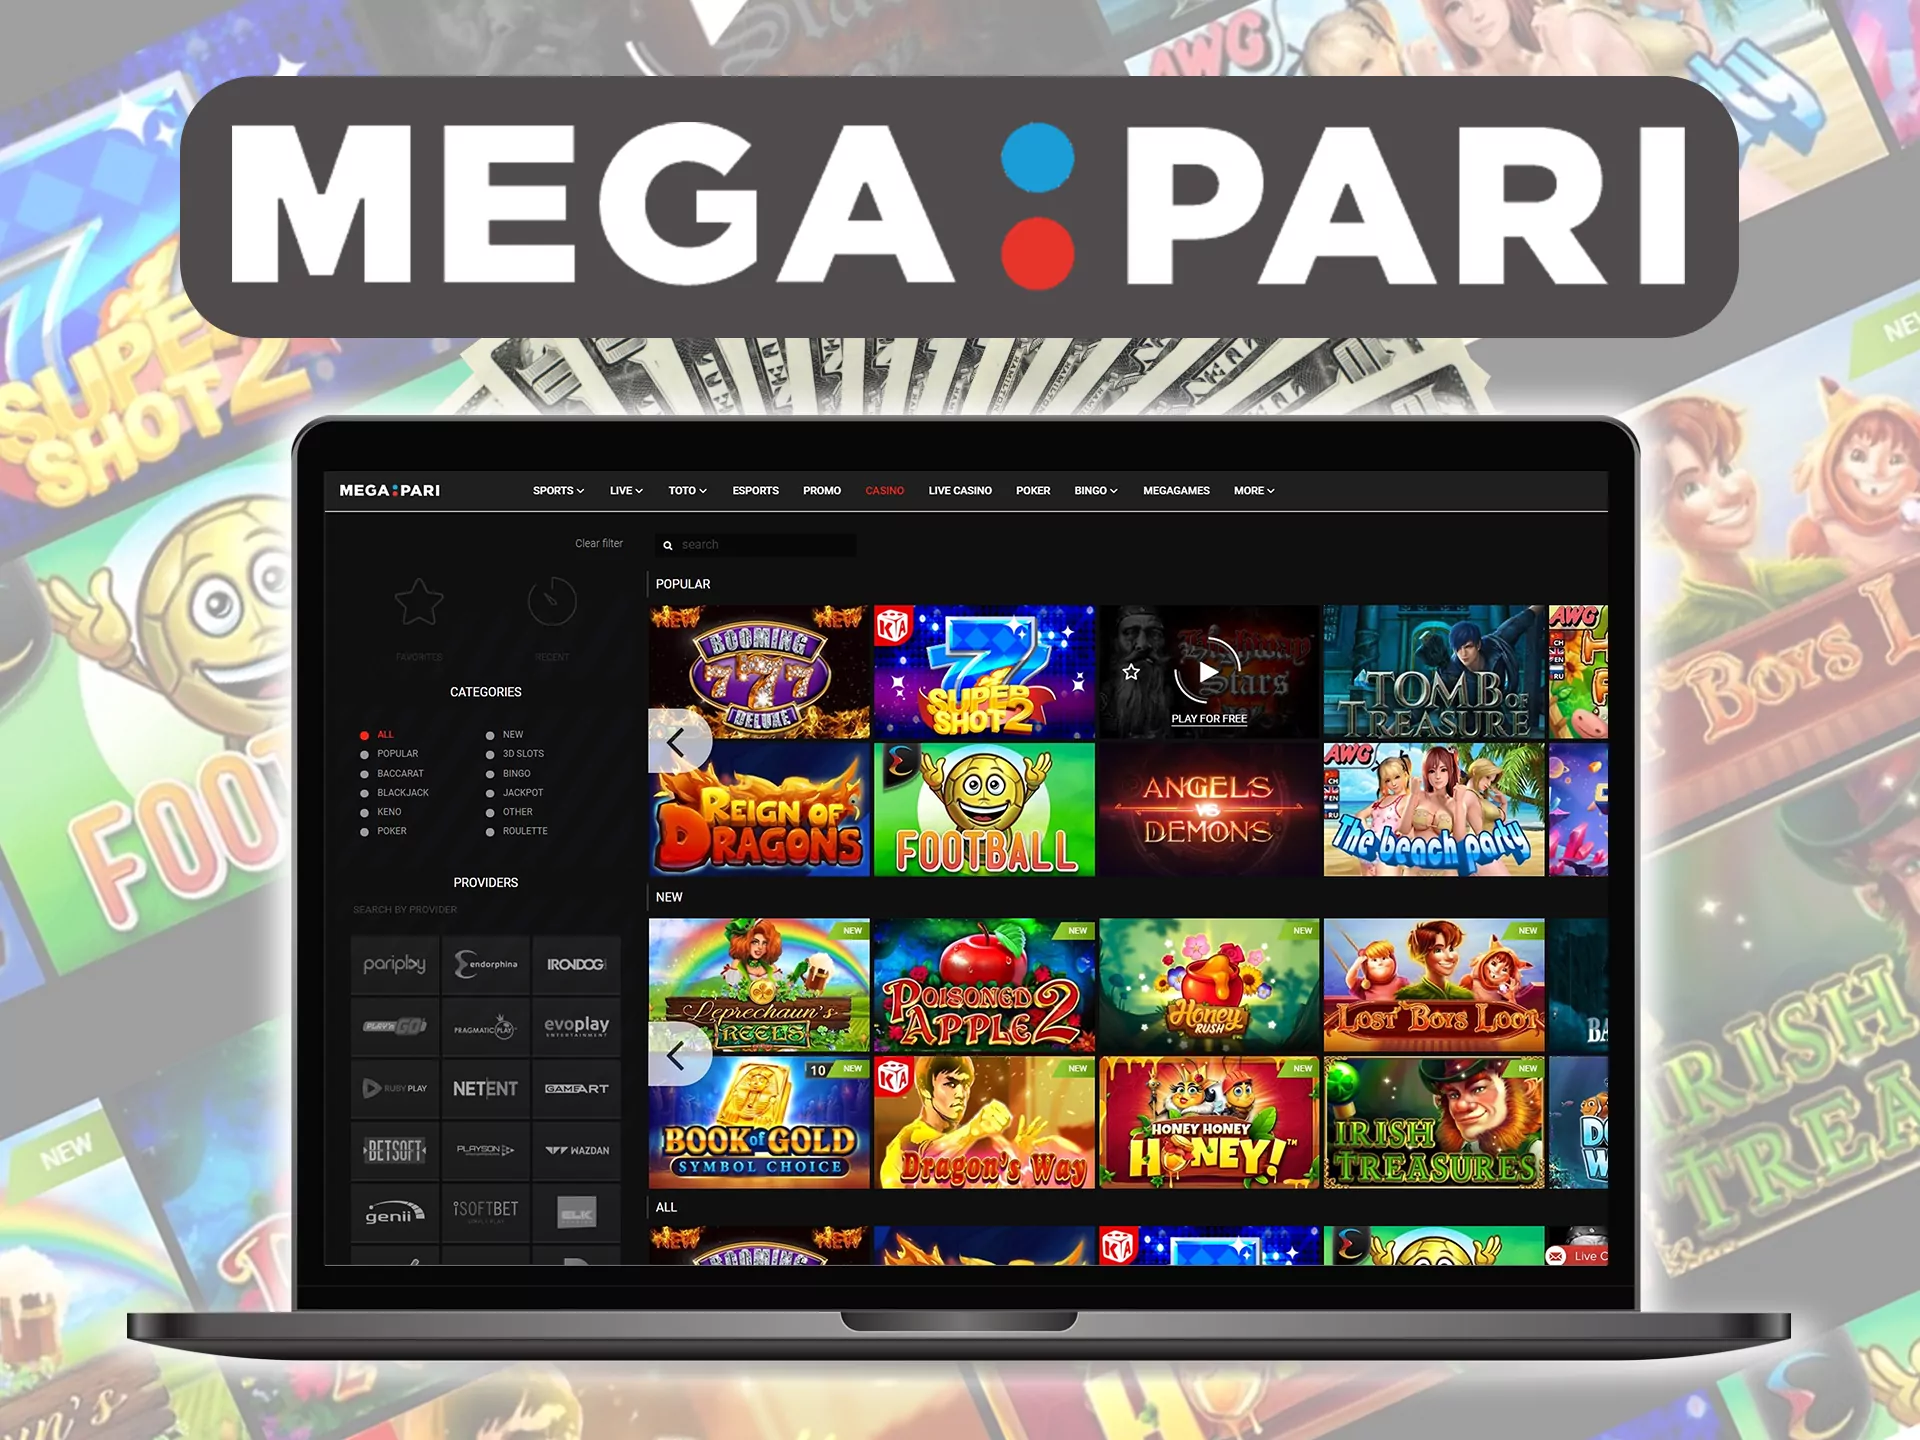 Megapari casino bonuses are available for new and existing players.